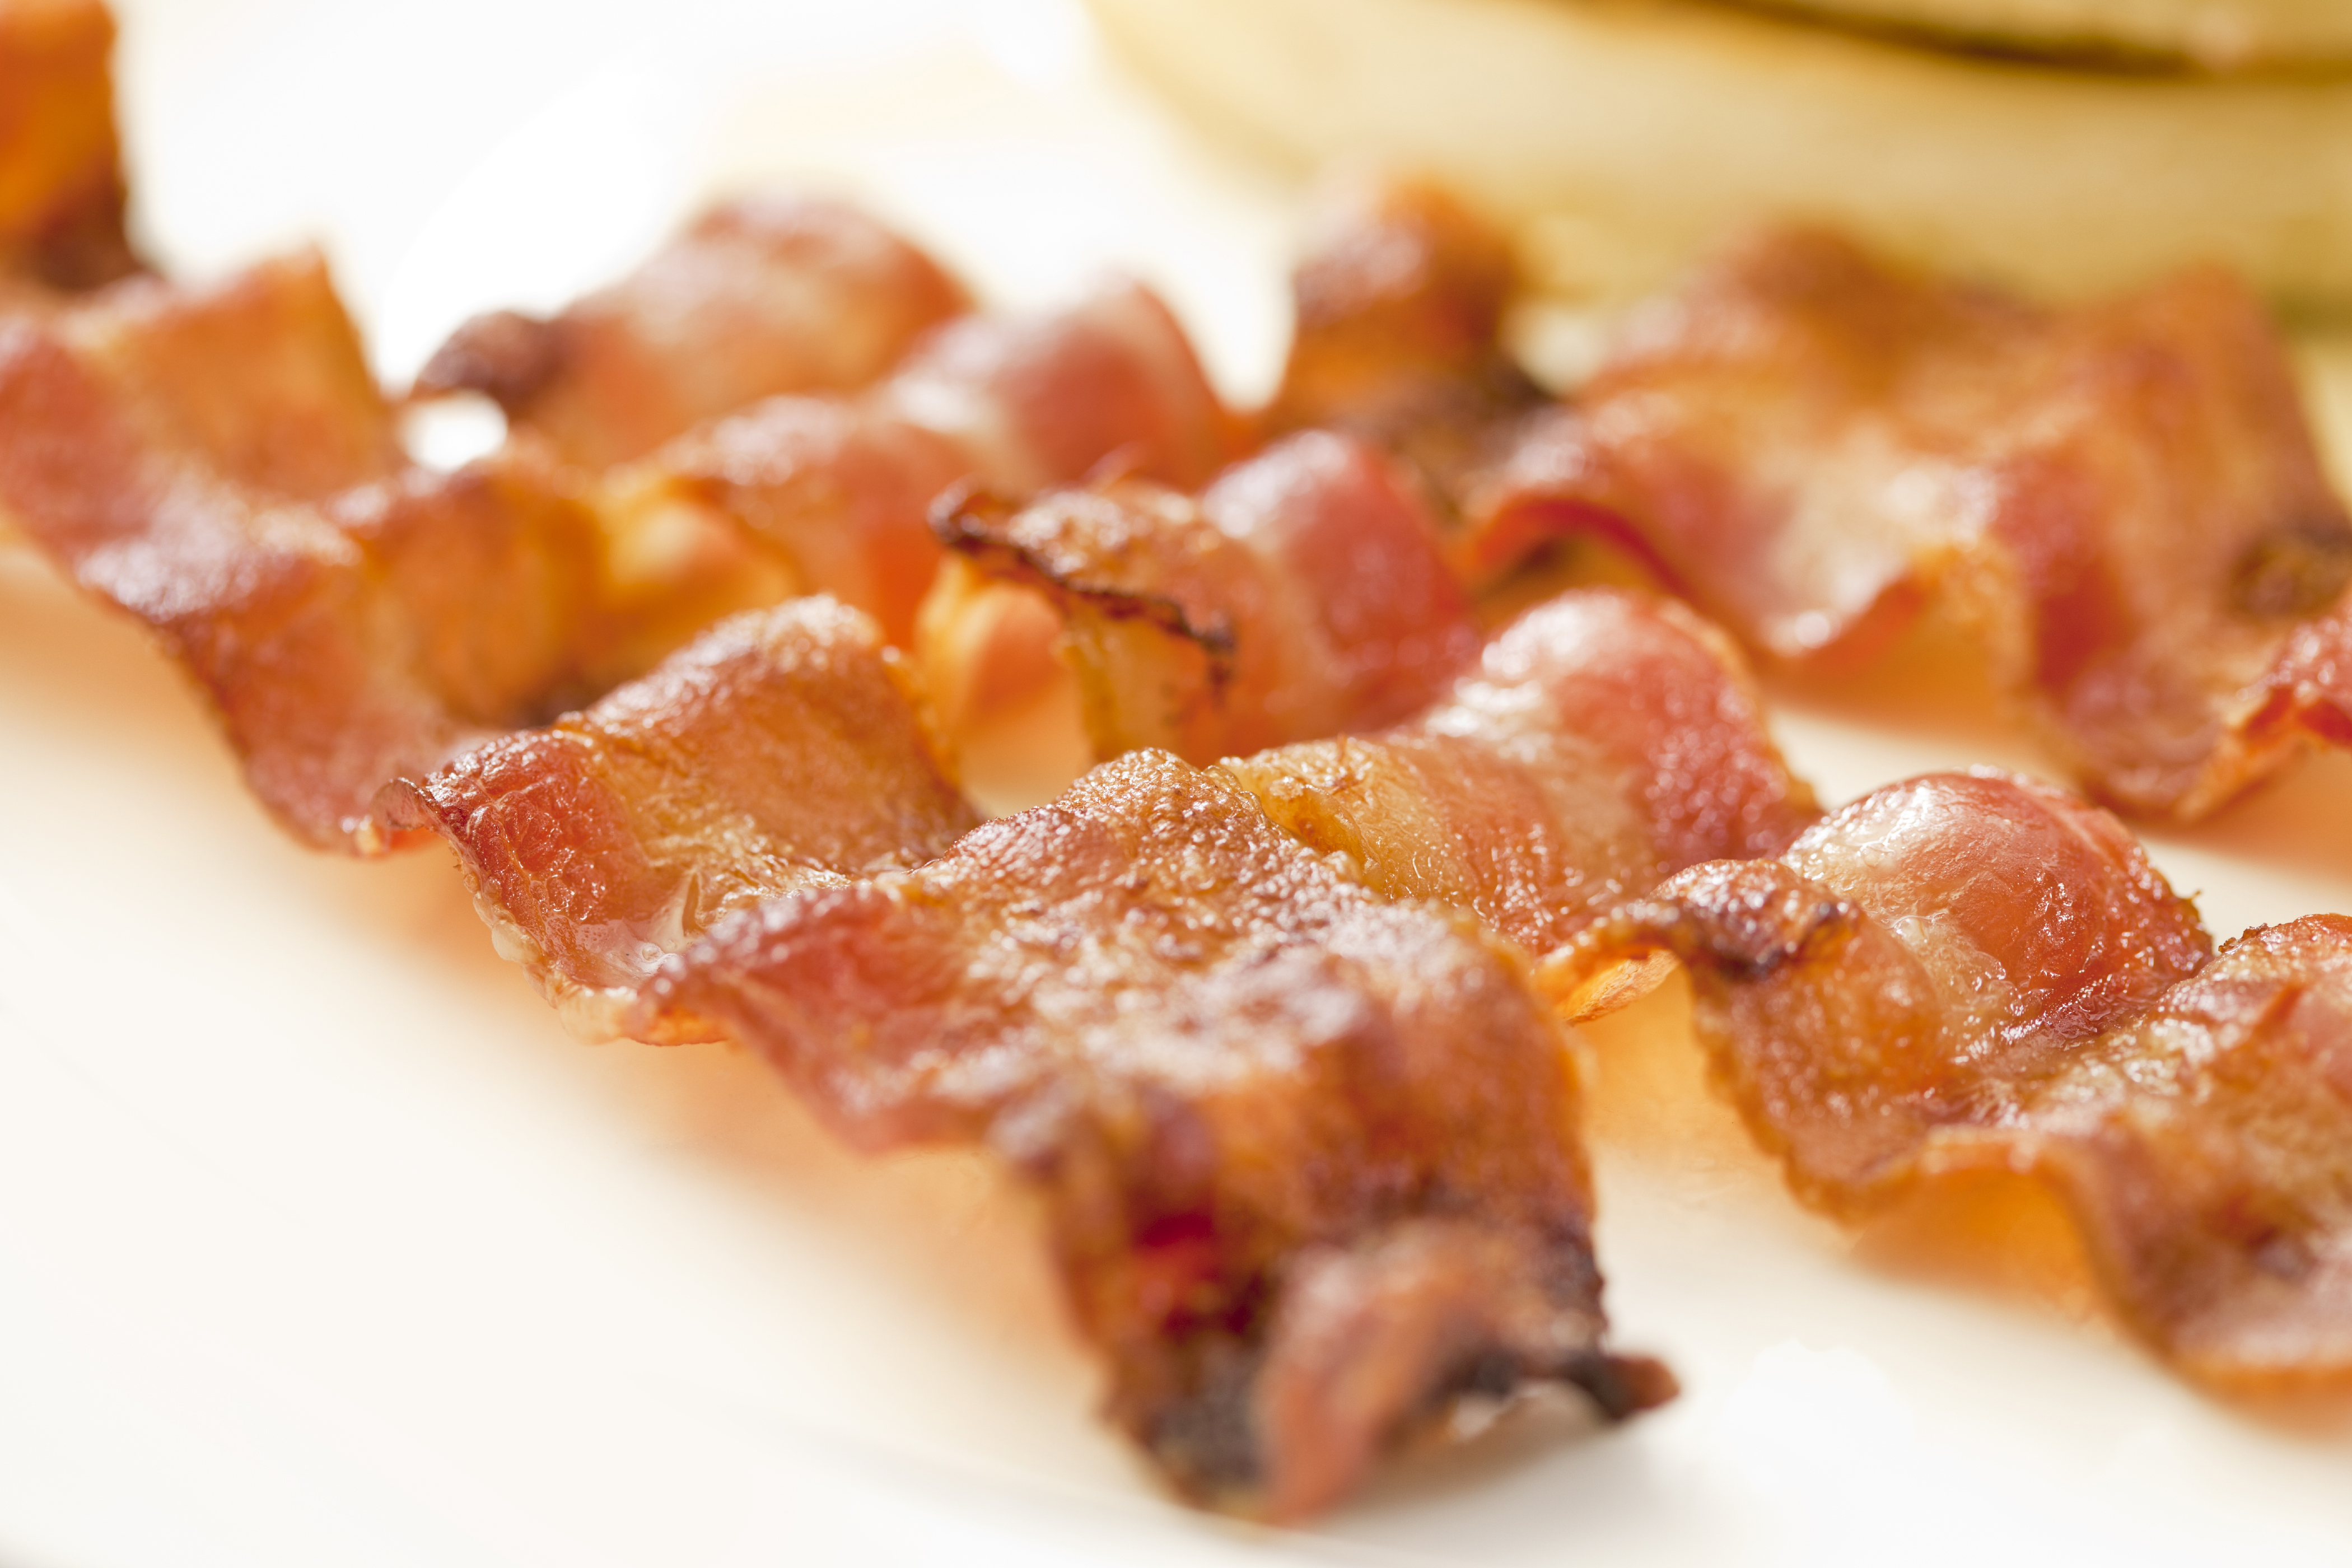 Bacon and other cured meats have been studied for possible links to cancer.